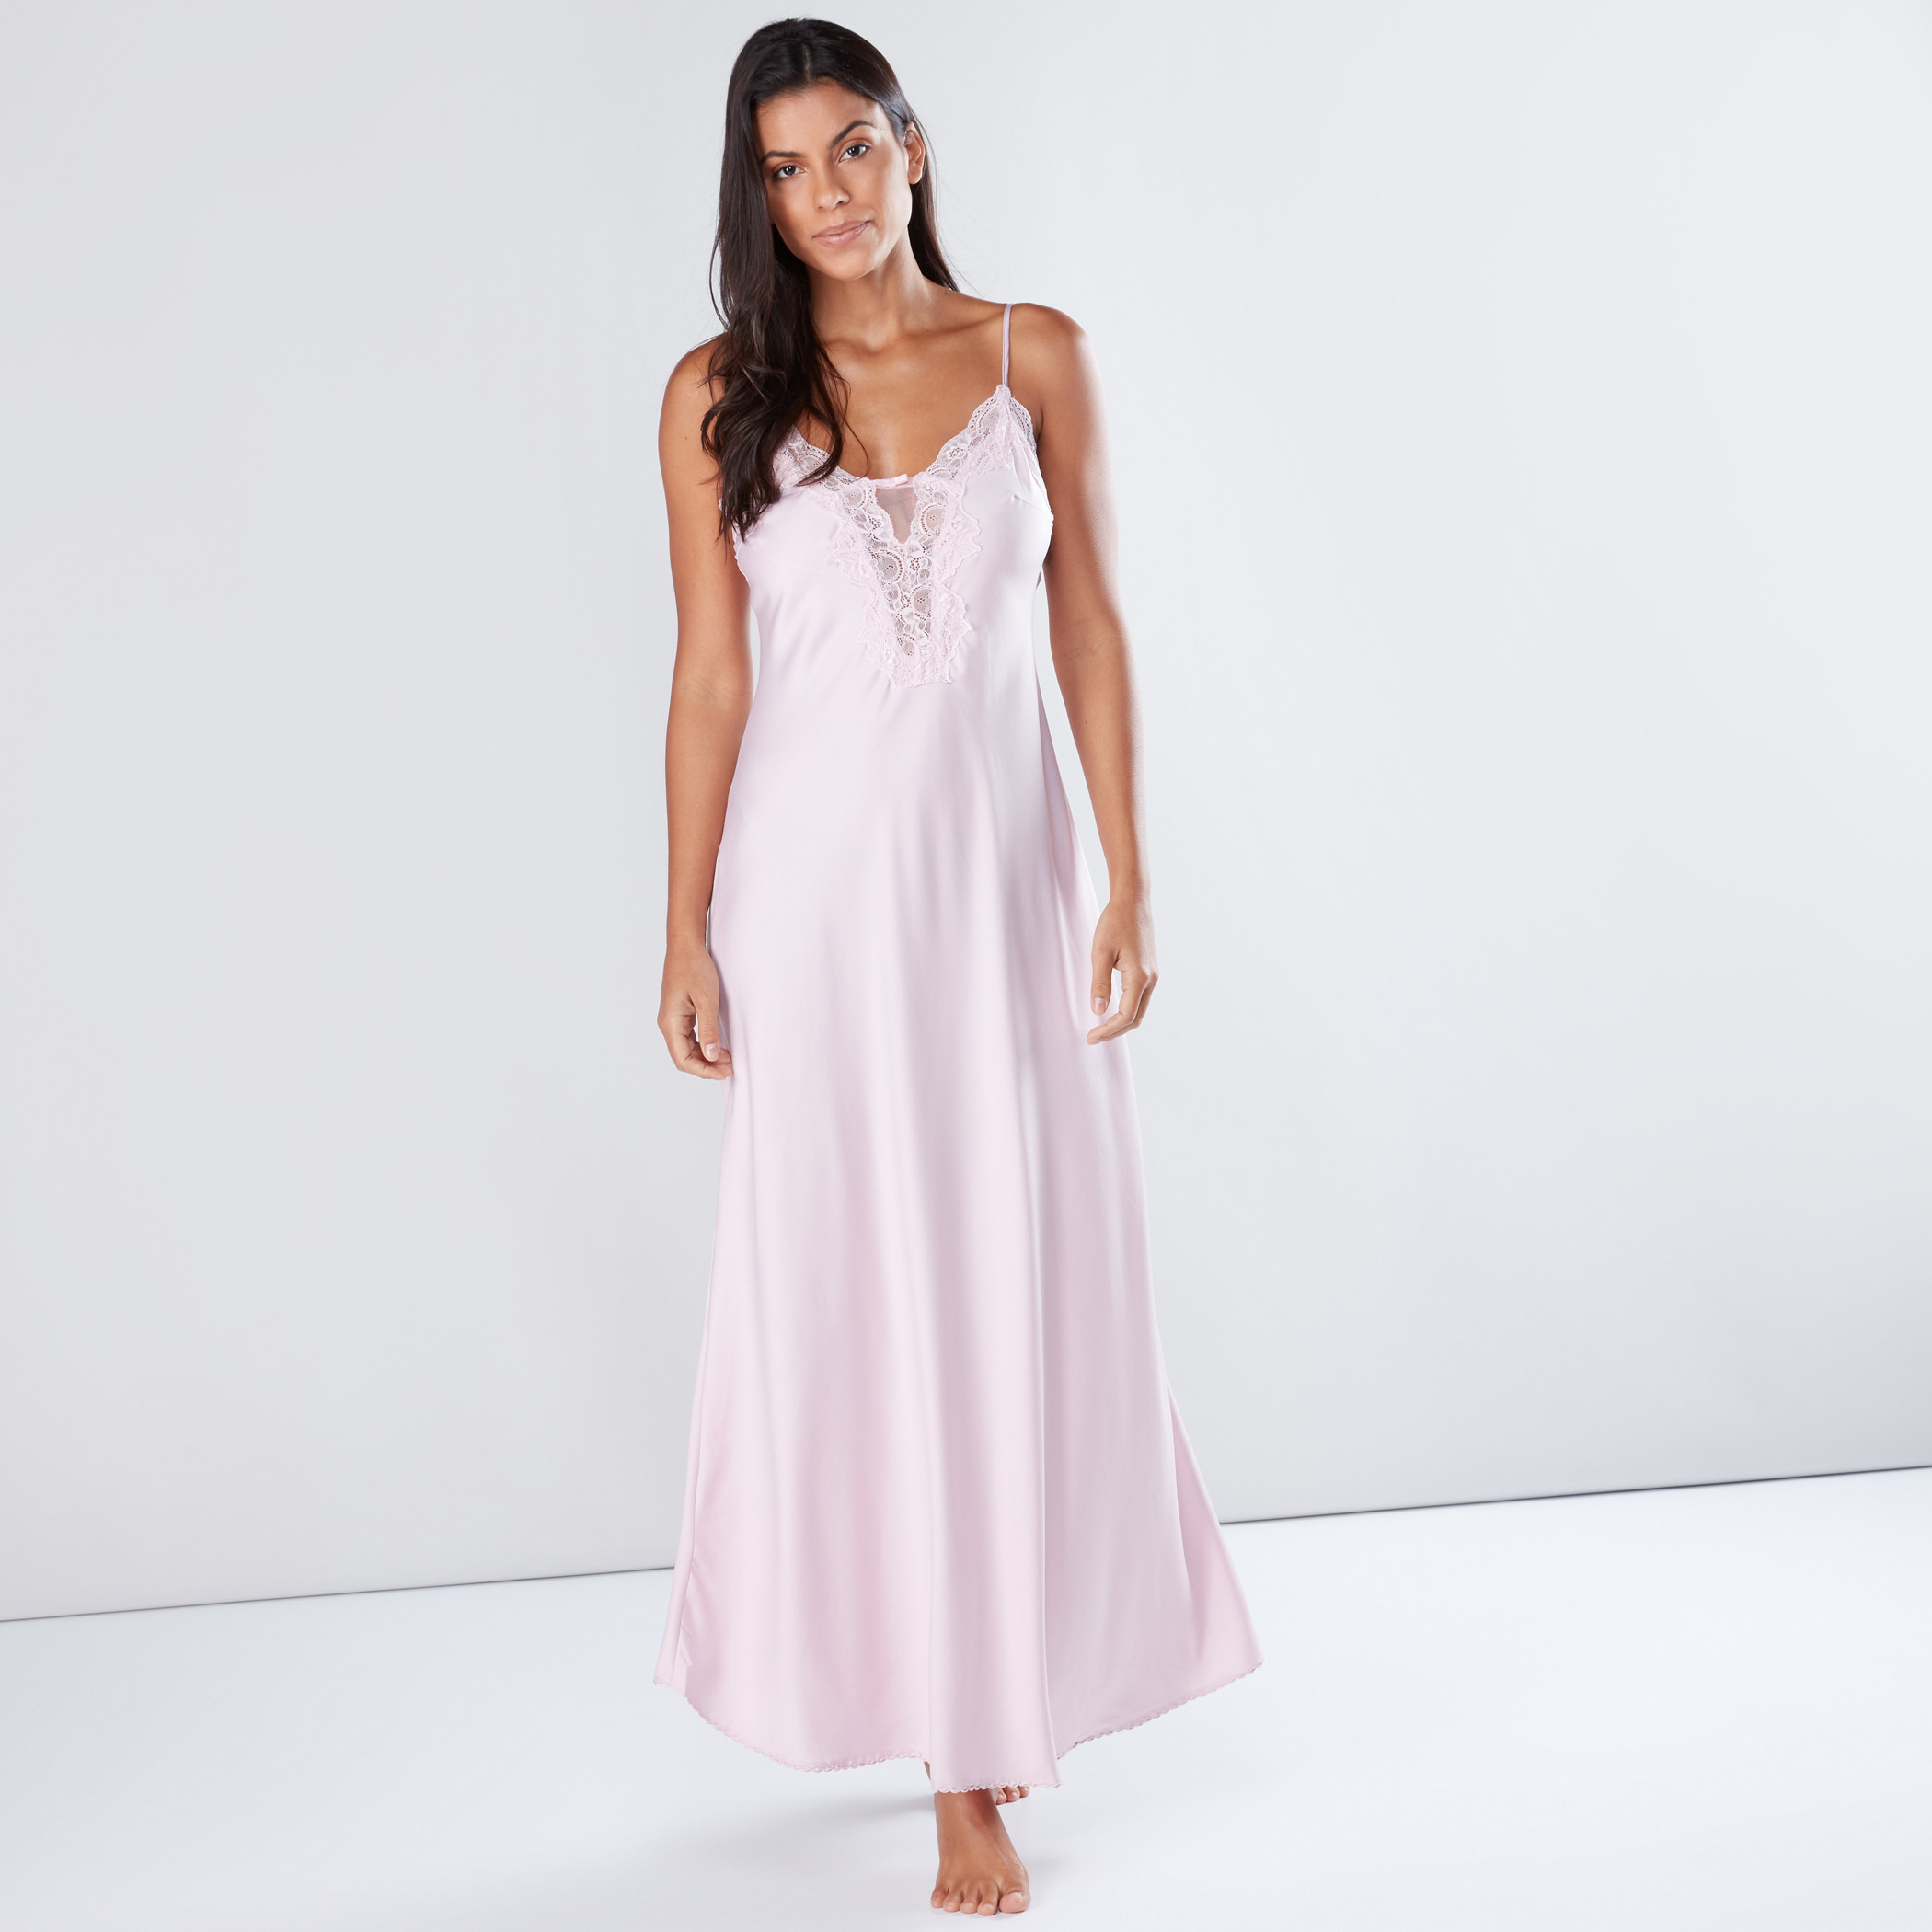 Shop Maxi Sleep Dress with Lace Detail ...